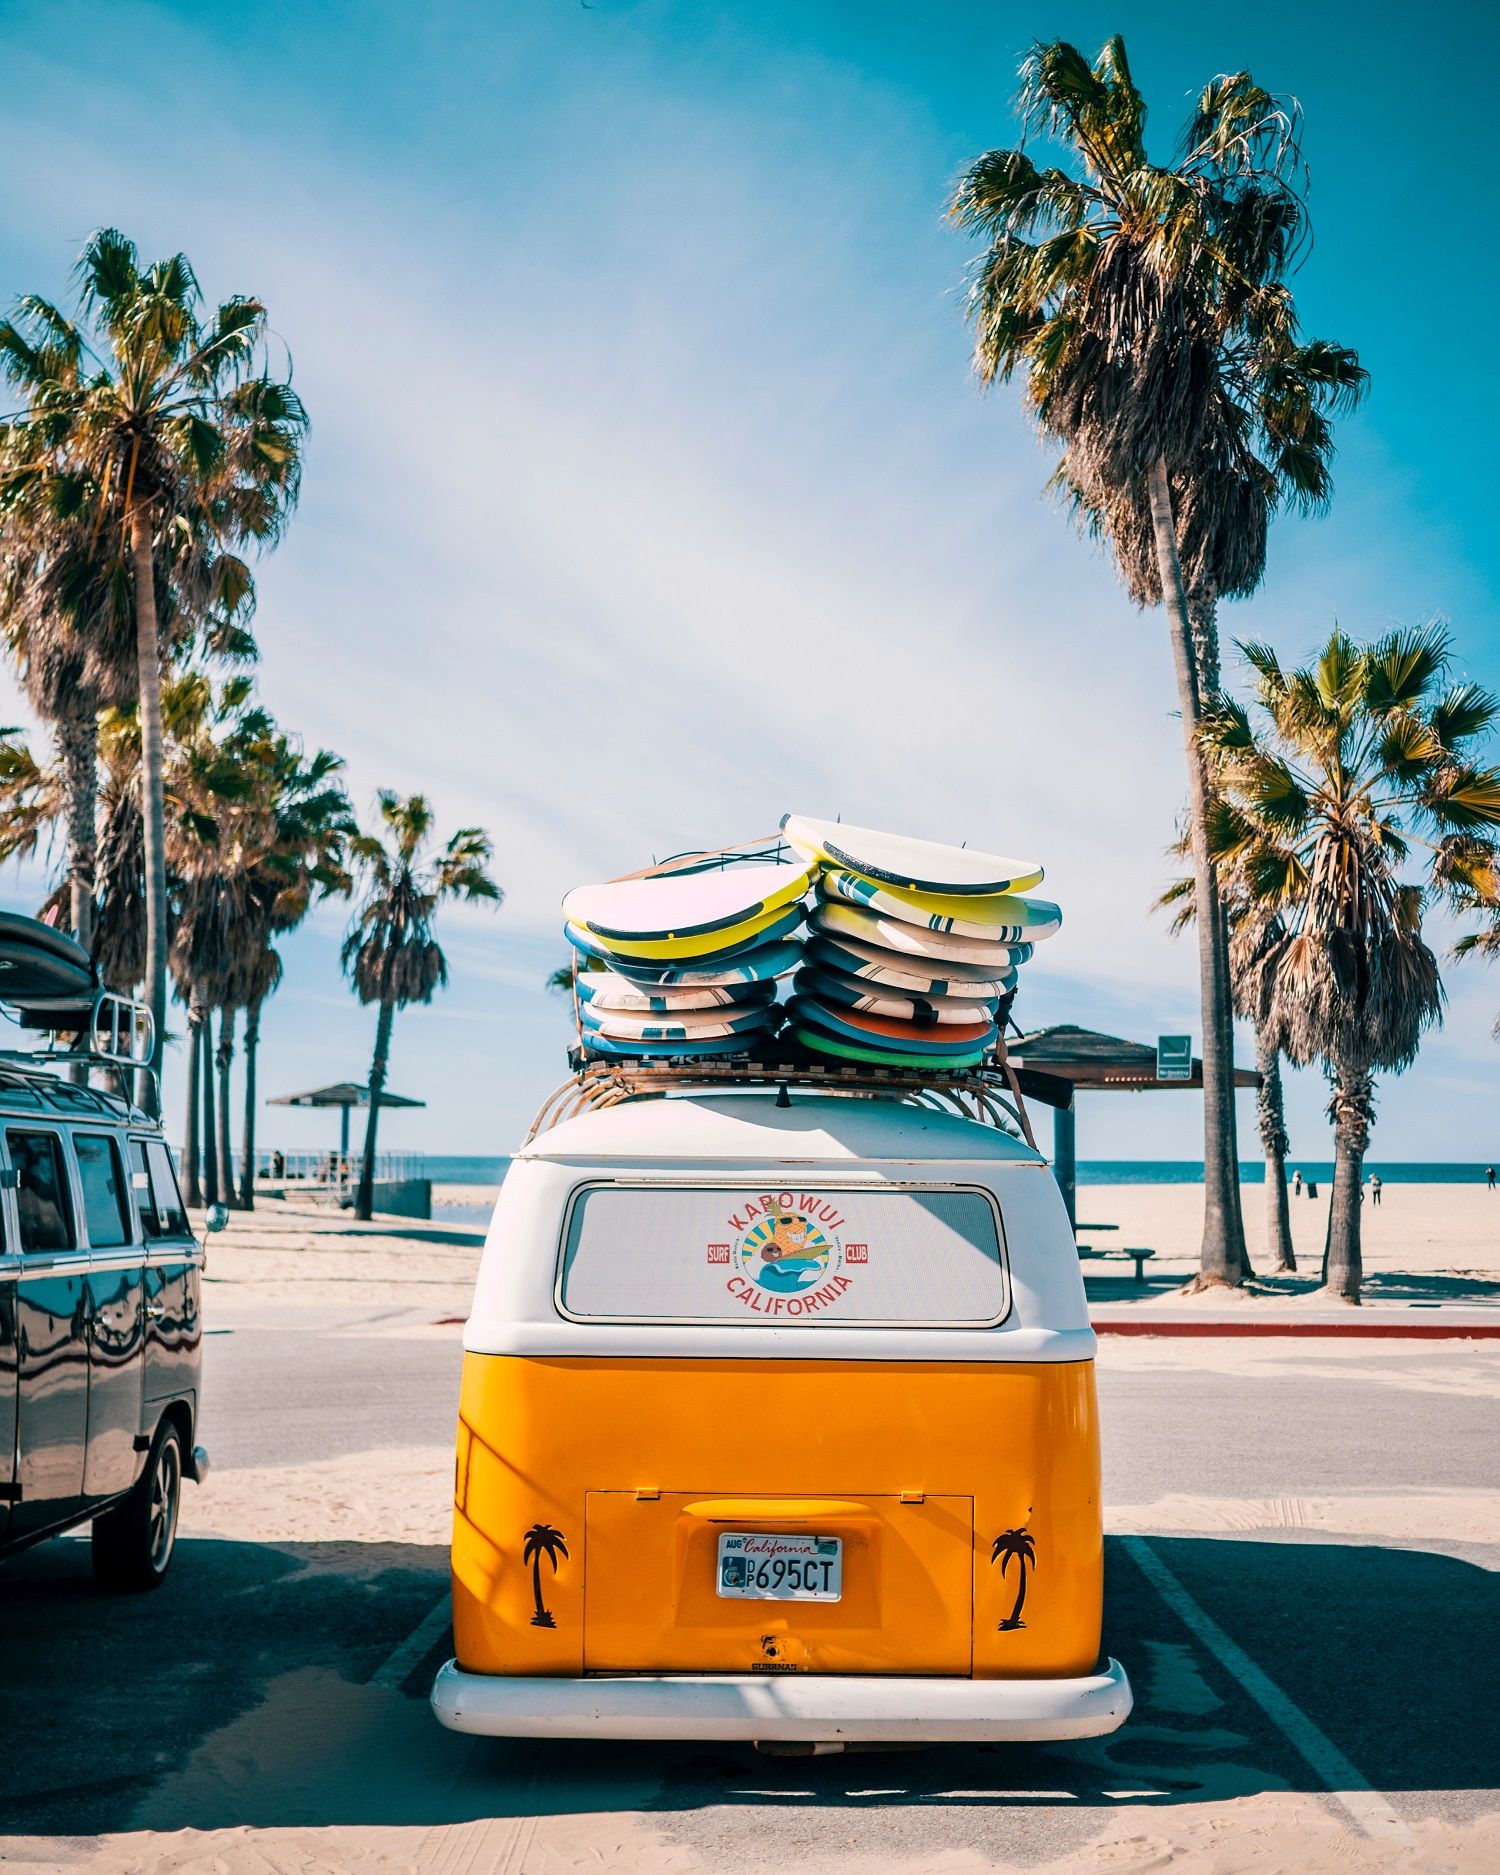 A van with surf boards on top.